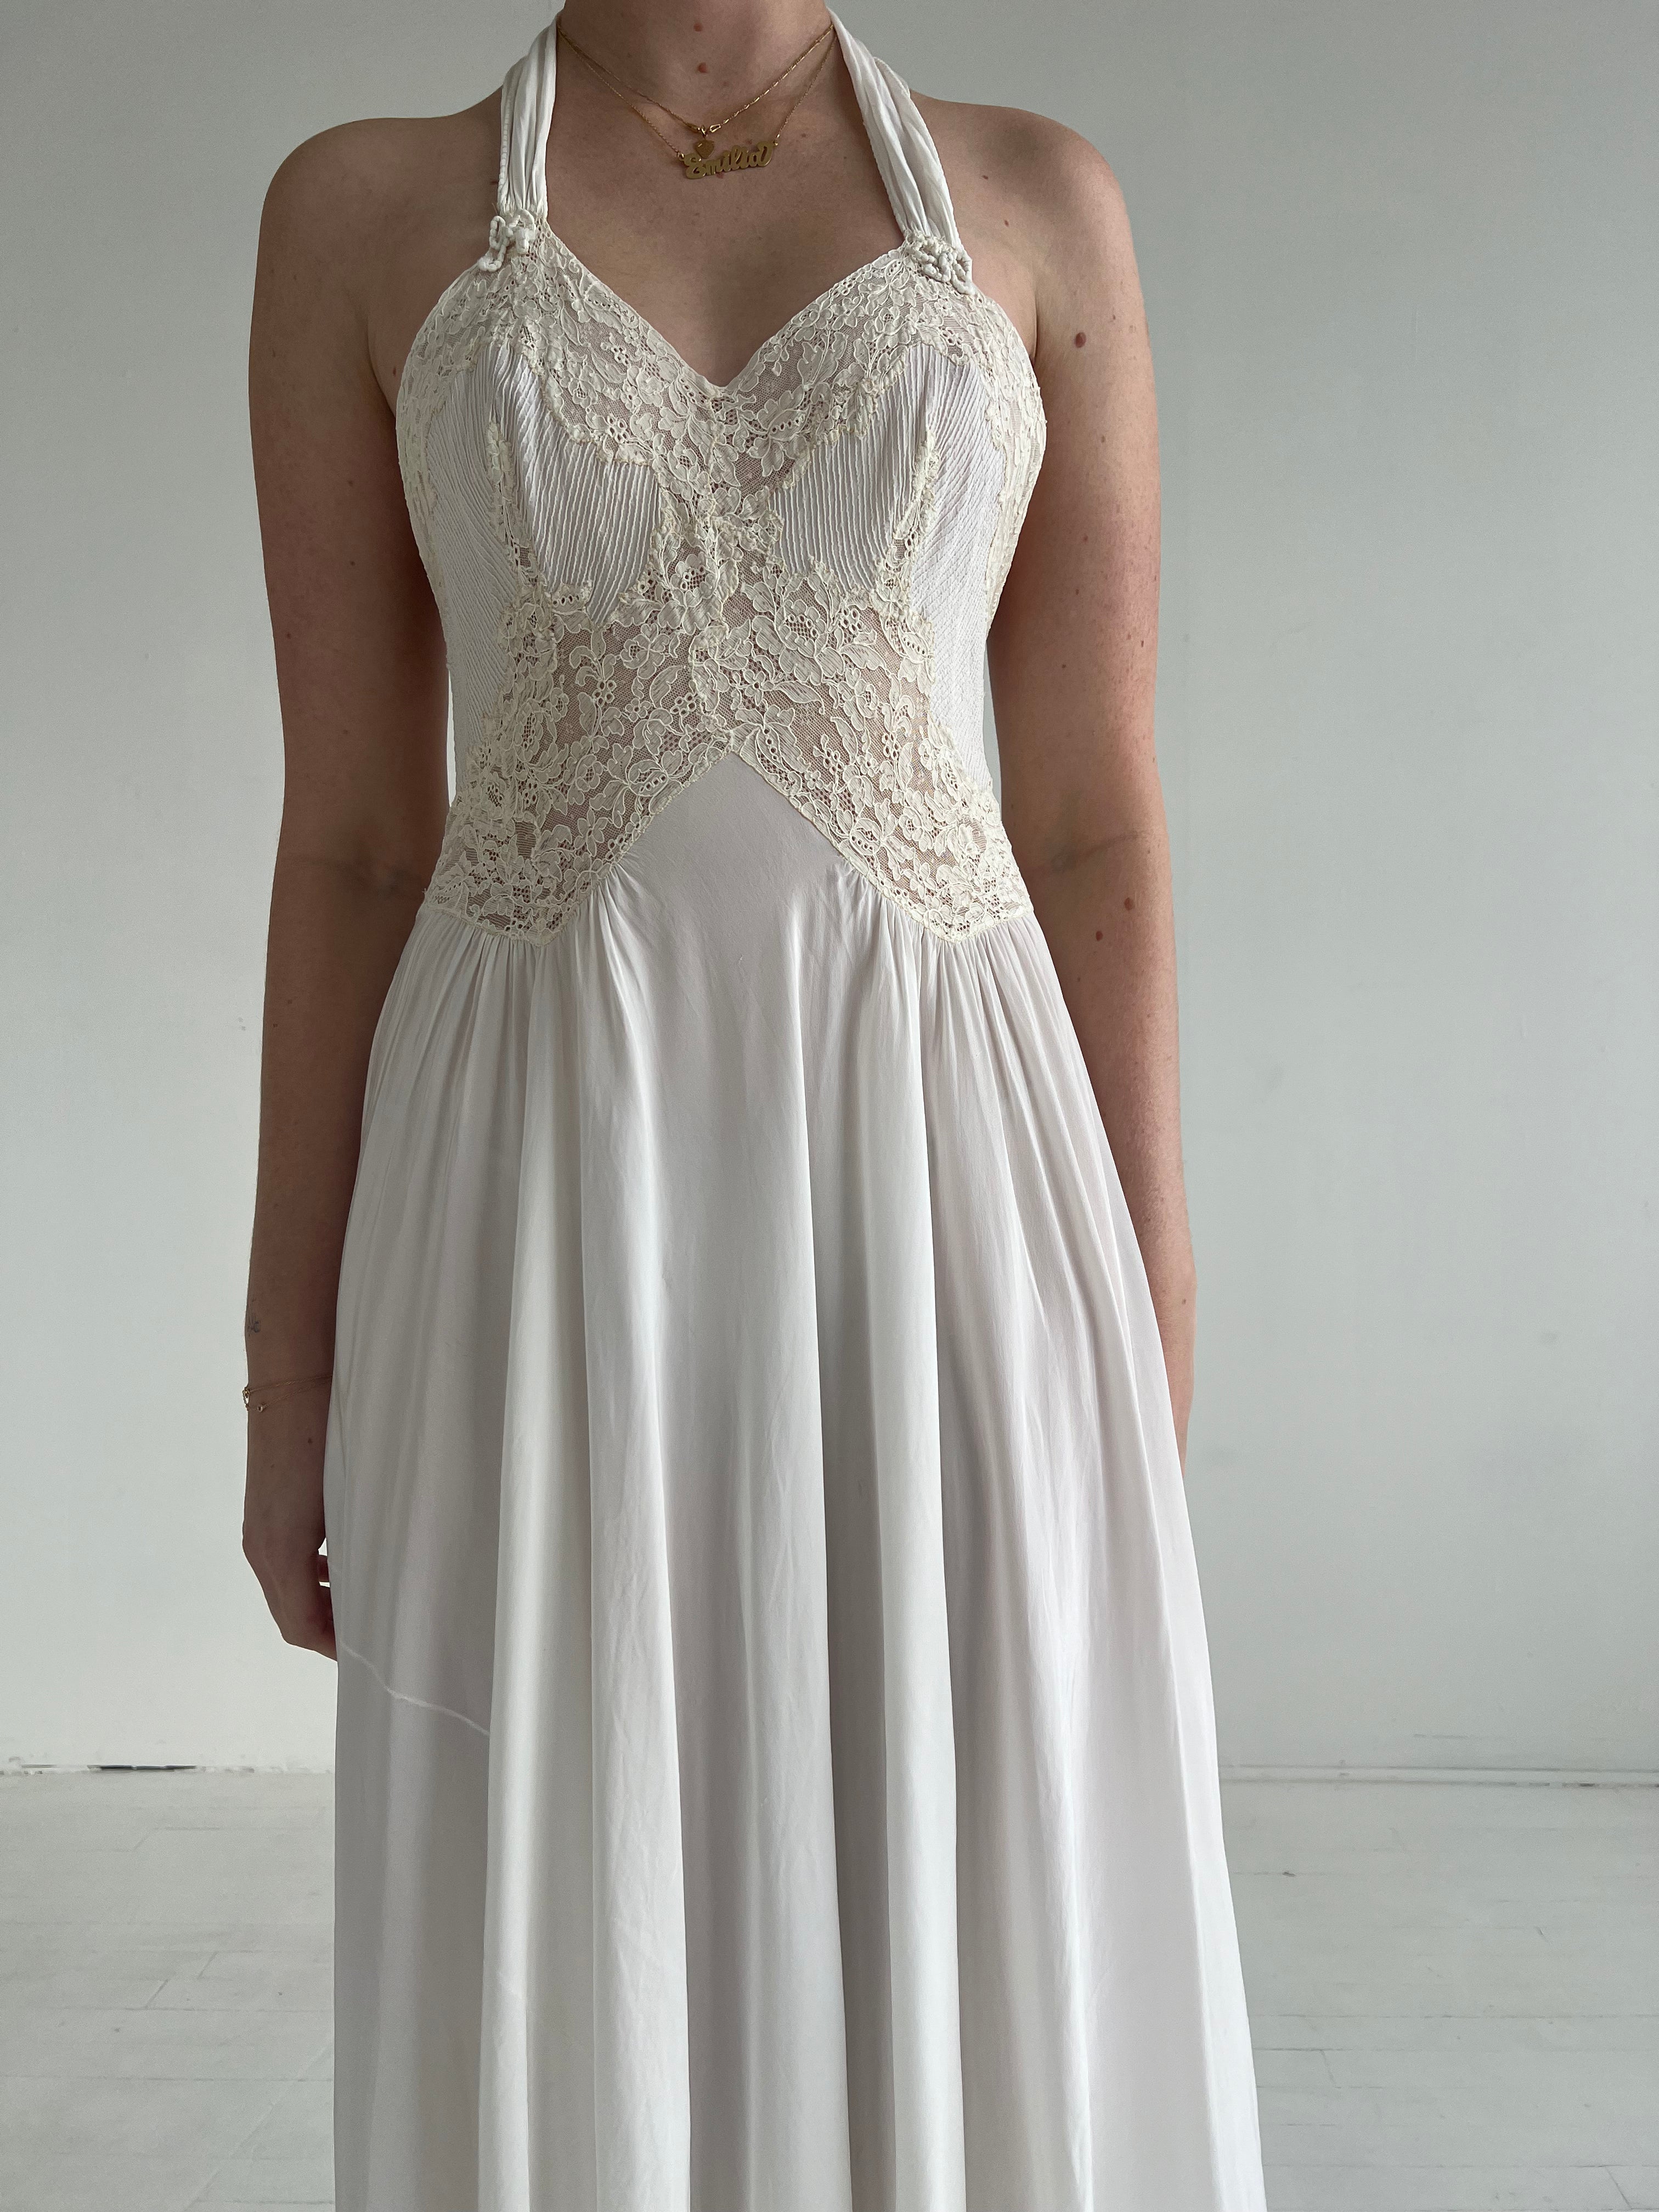 1930's Bridal White Halter Dress with Lace